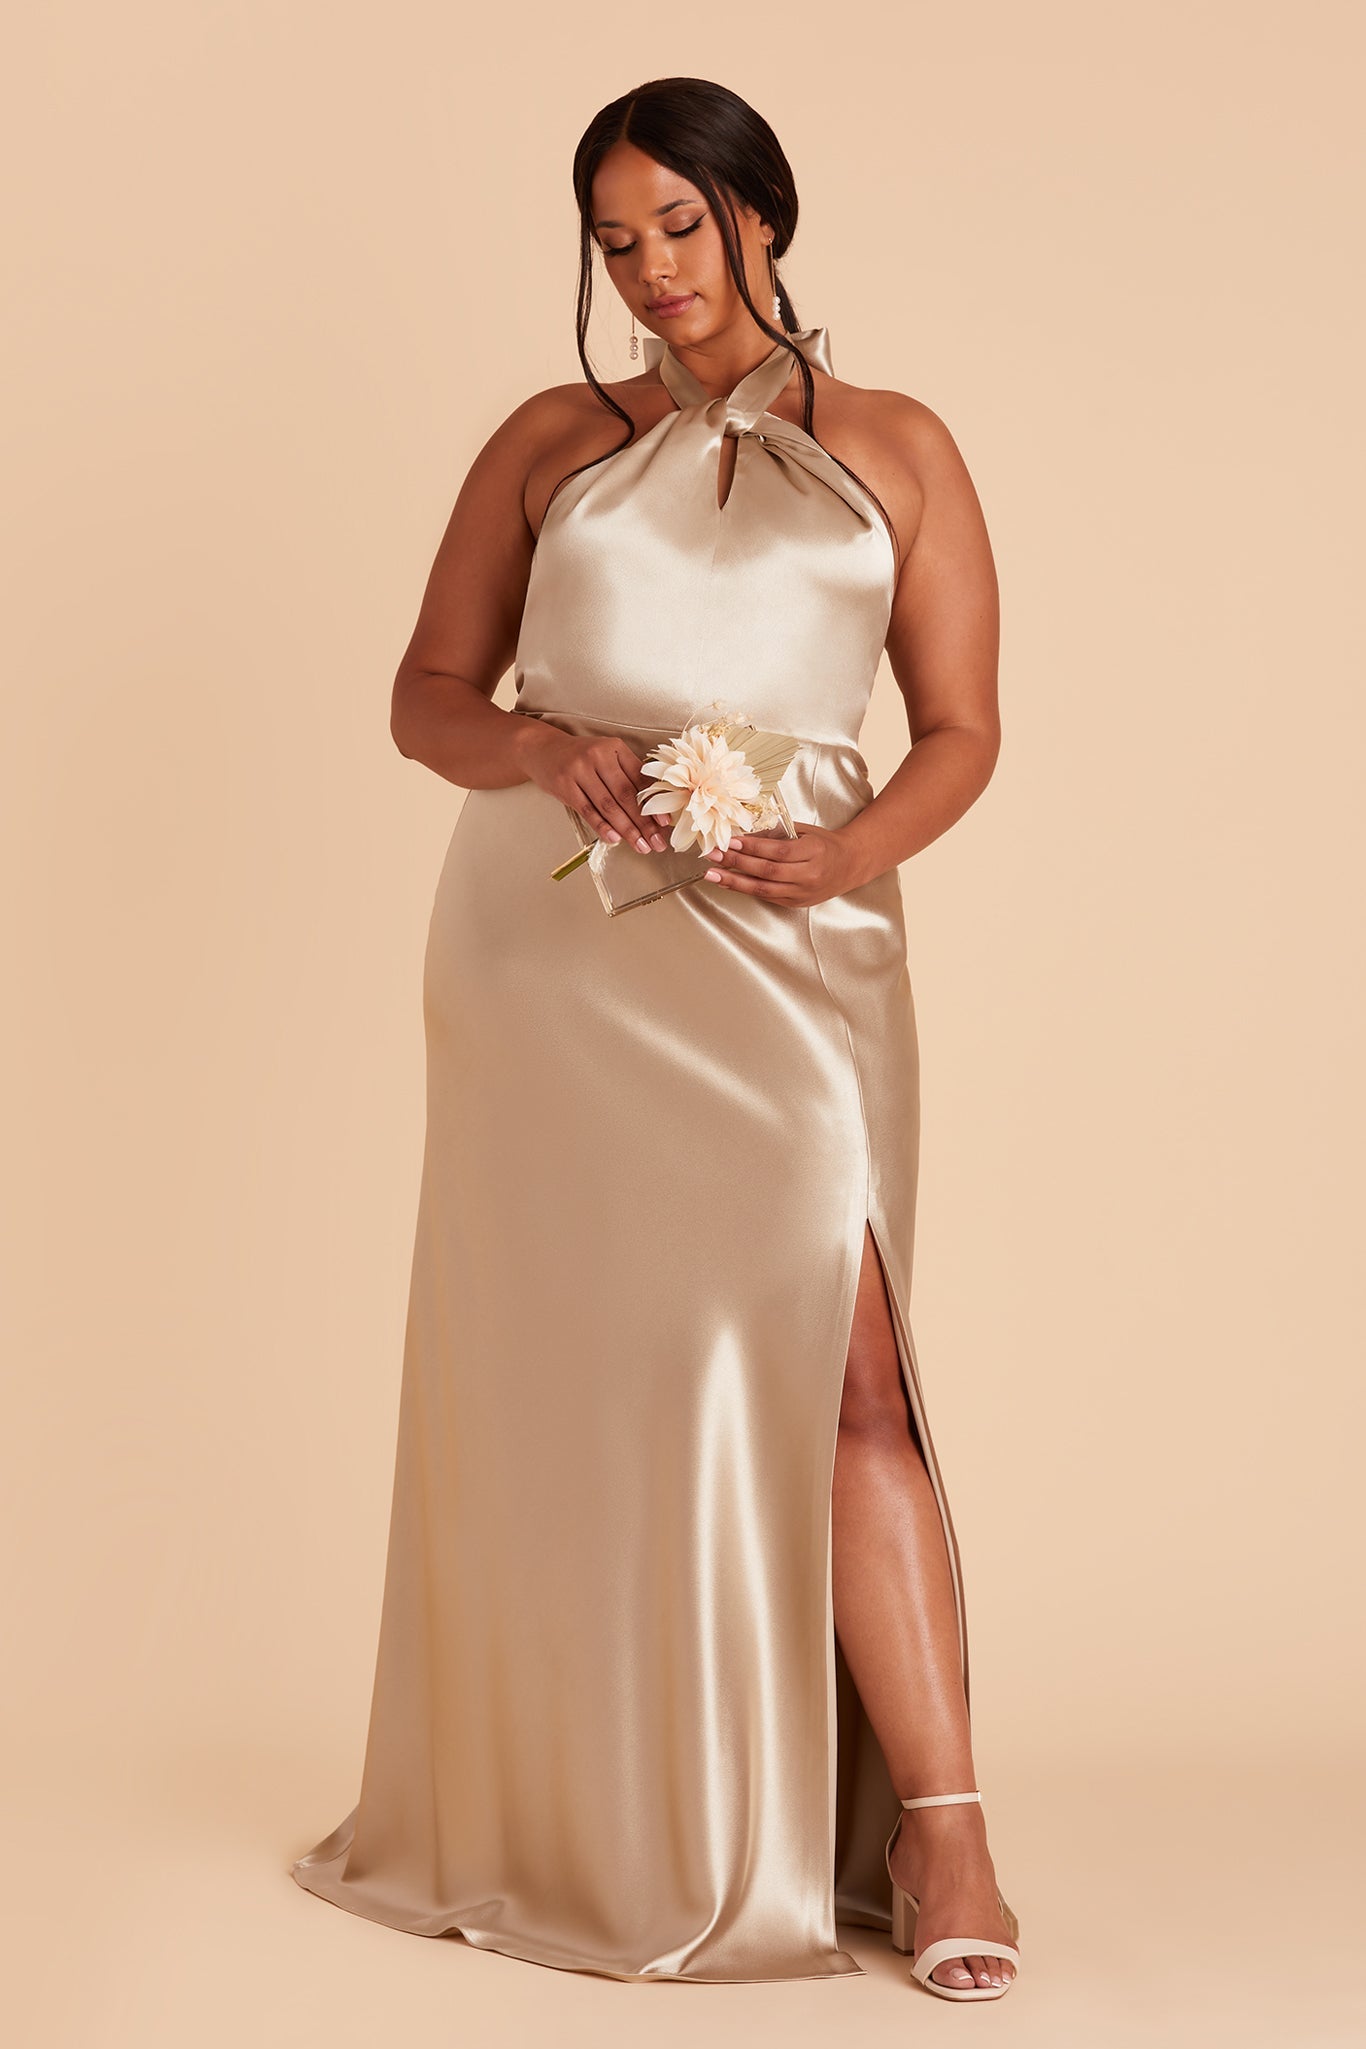 Front view of the Monica Dress Curve in neutral champagne satin shows the model revealing their leg and foot through the dress slit. The model wears the Natalie Chunky Heel in almond.